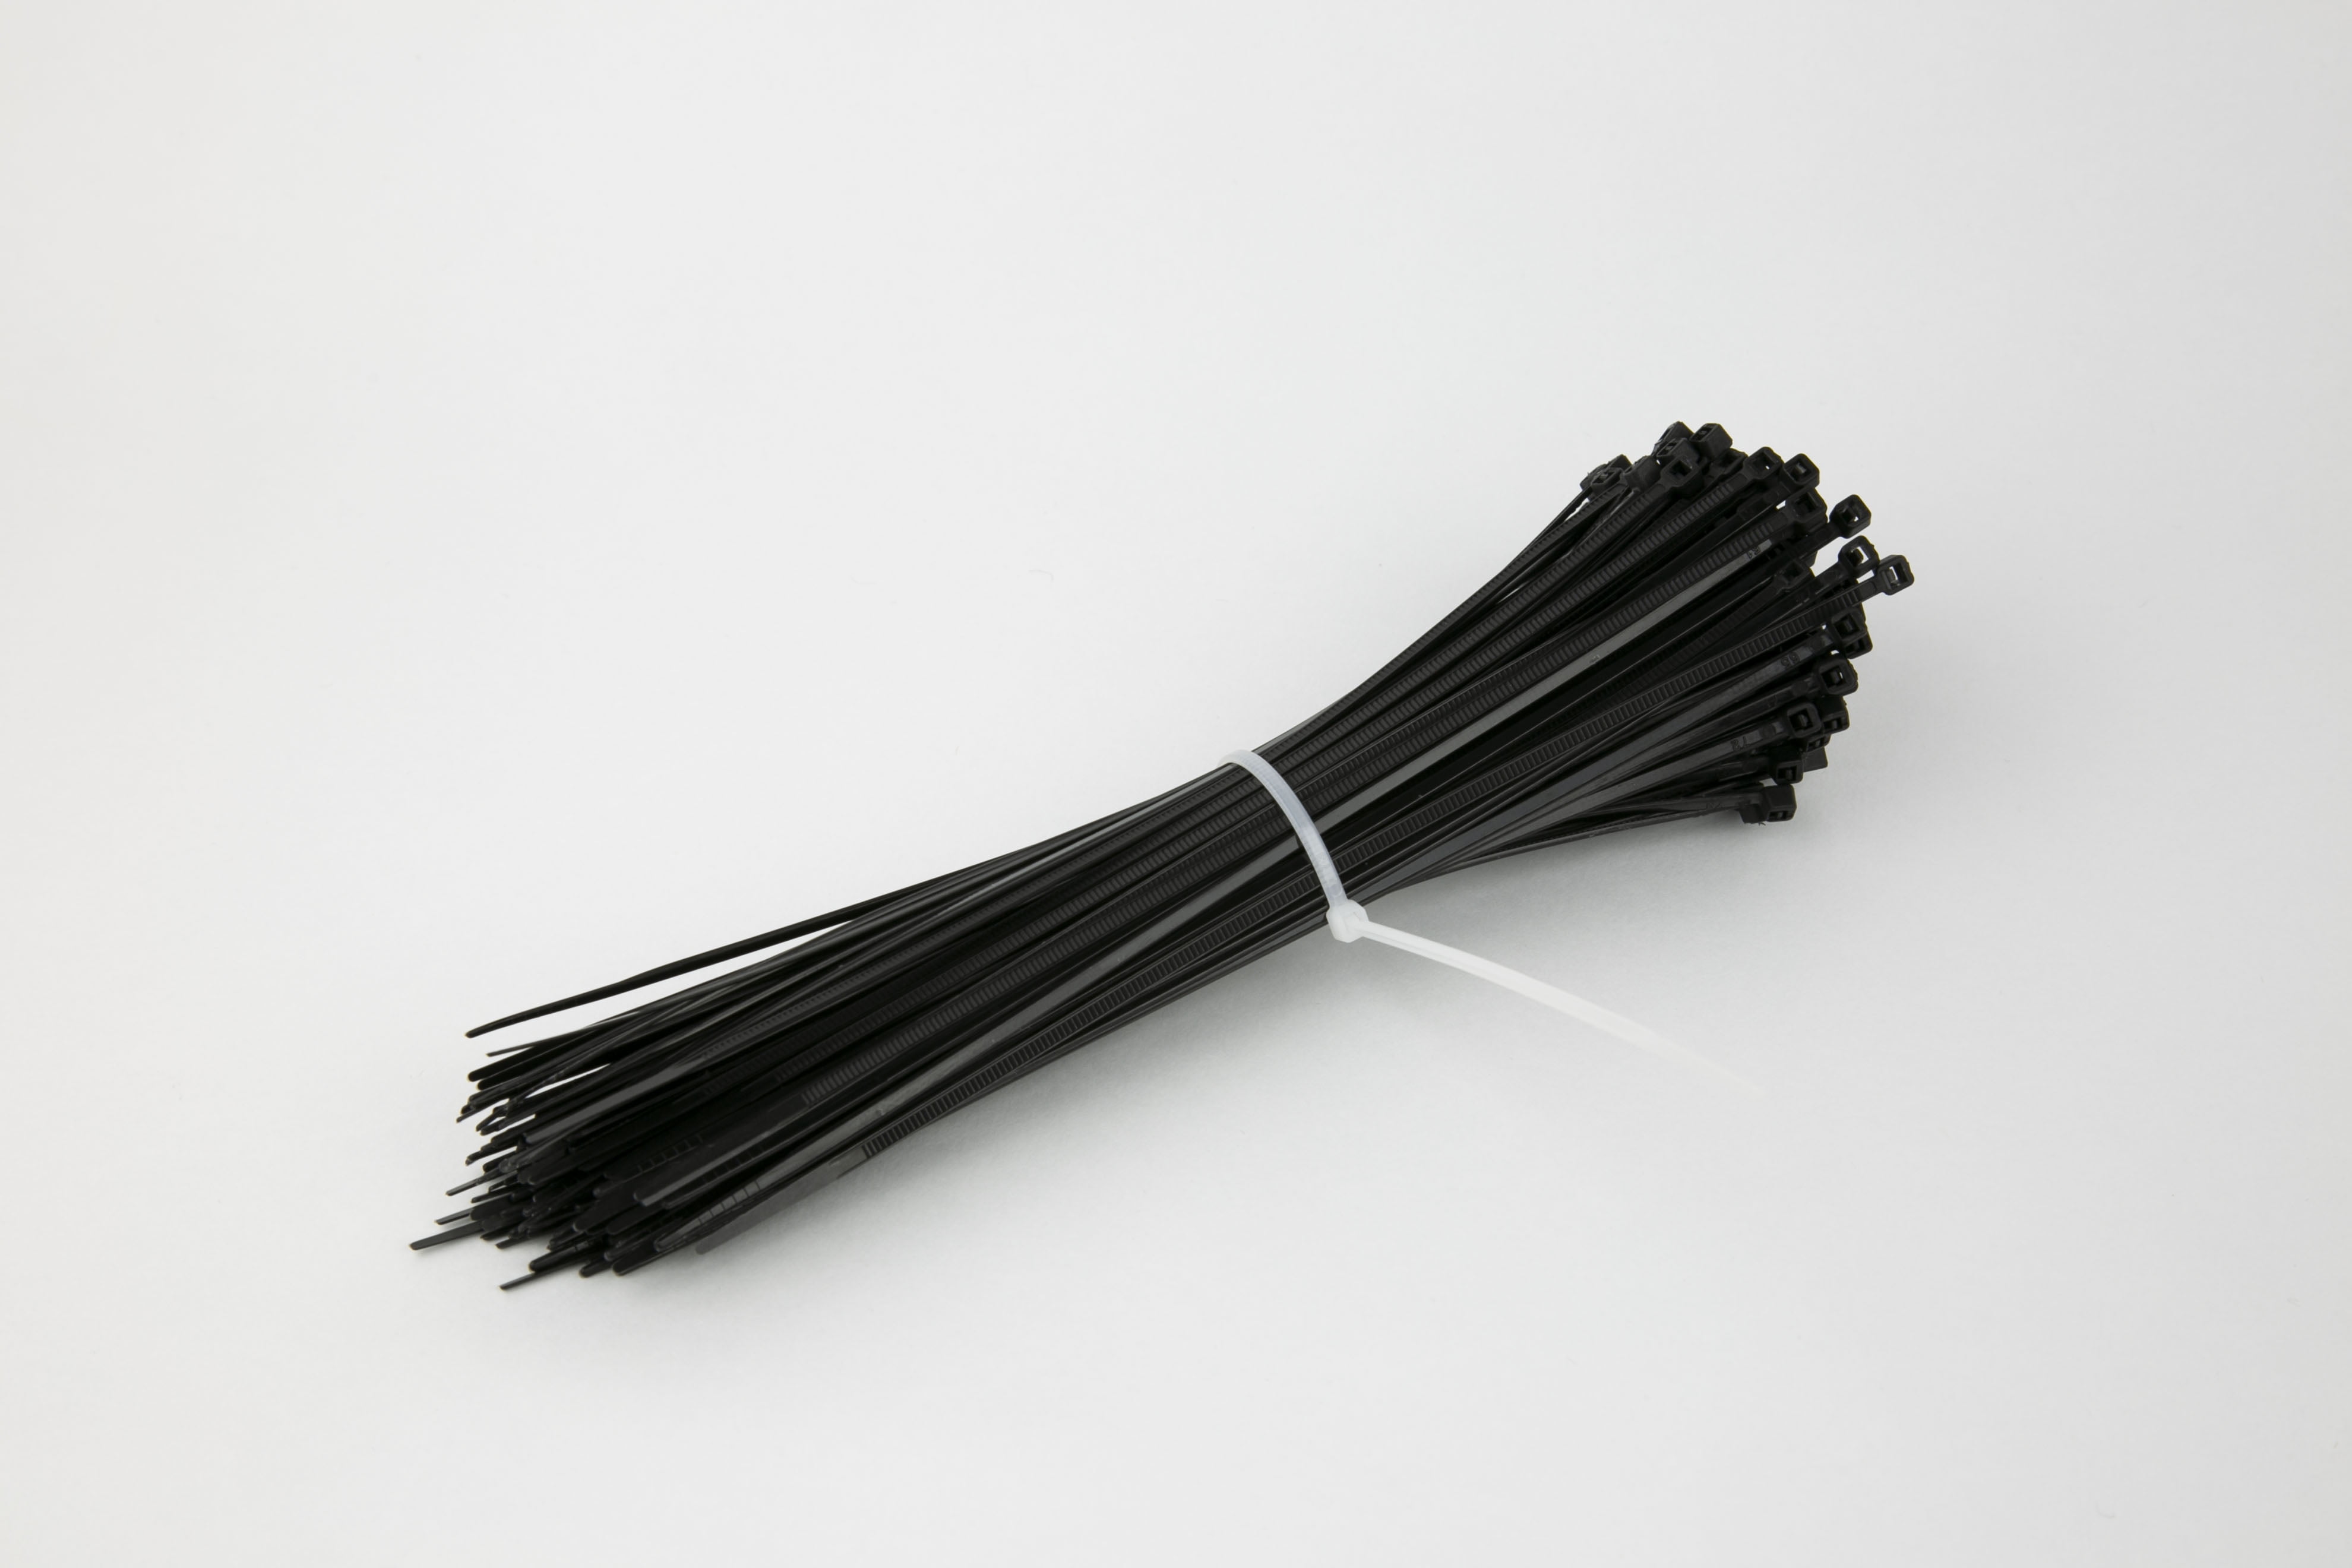 Details about   Self-locking Zip  200Pcs Nylon Cable Ties Tag Labels Plastic Loop Ties Markers 